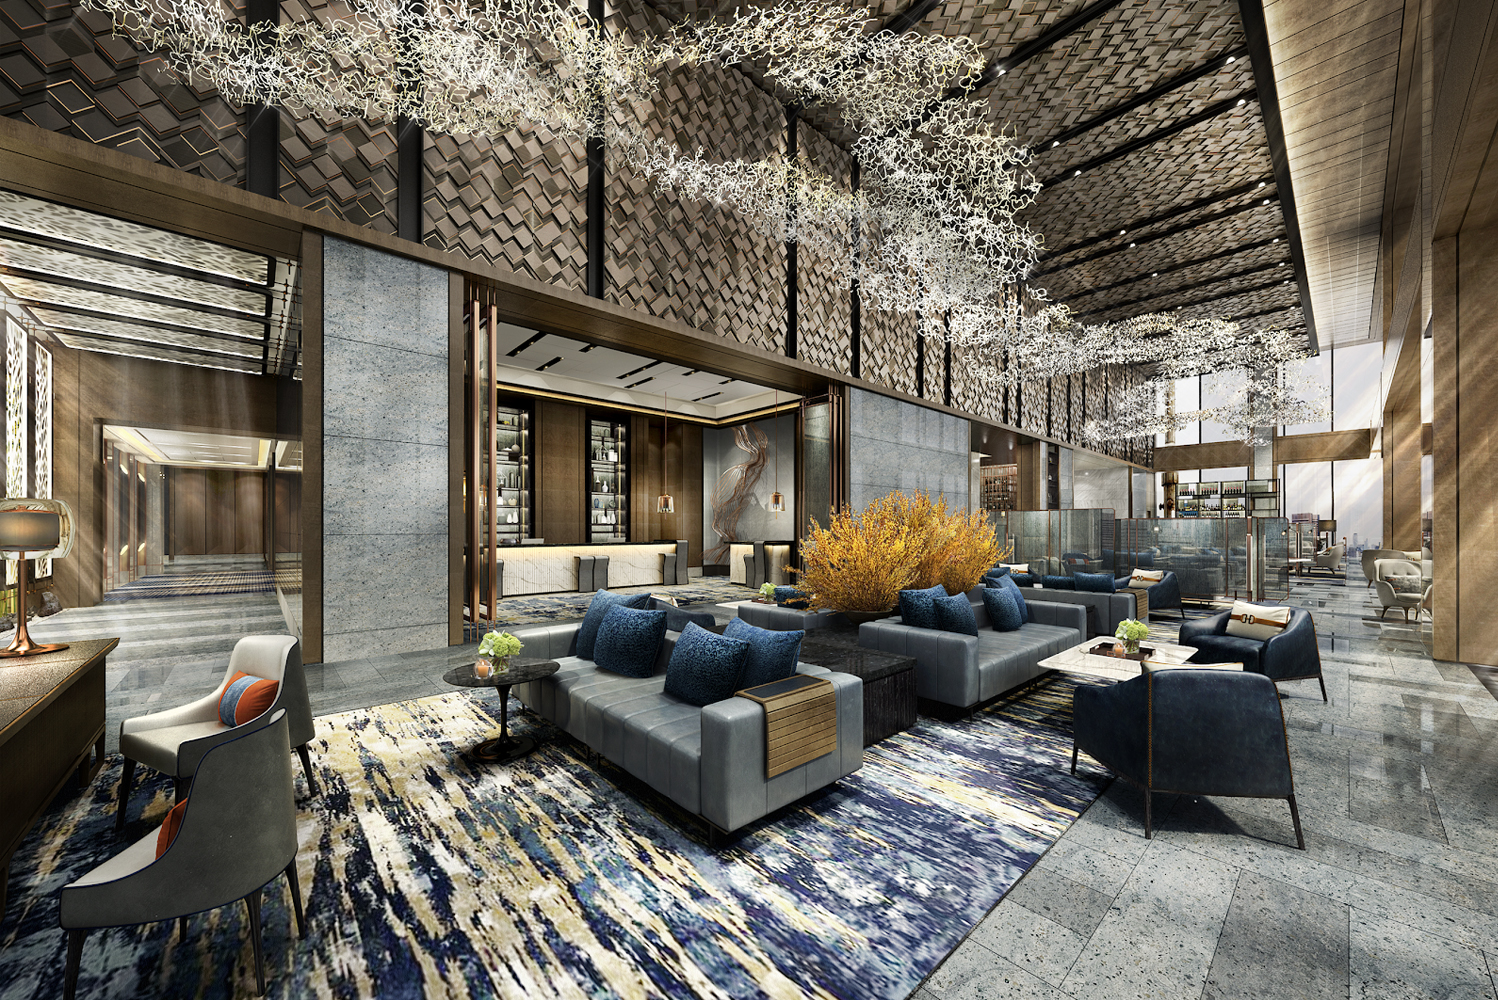 Marriott International will open the mesm Tokyo Autograph Collections second property in Japan in 2020 